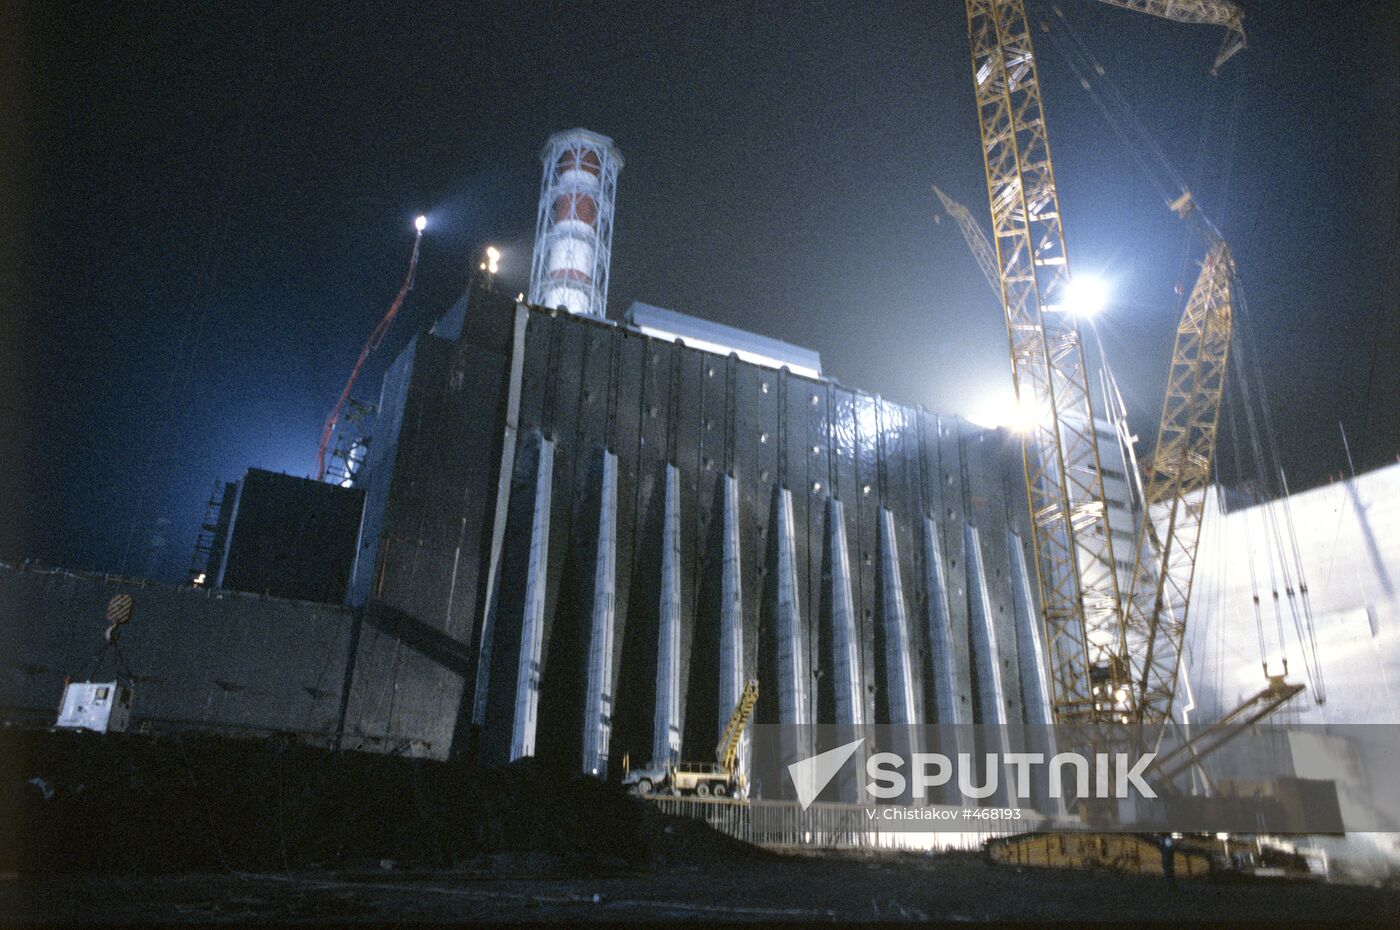 Unit 4 of Chernobyl Nuclear Power Plant